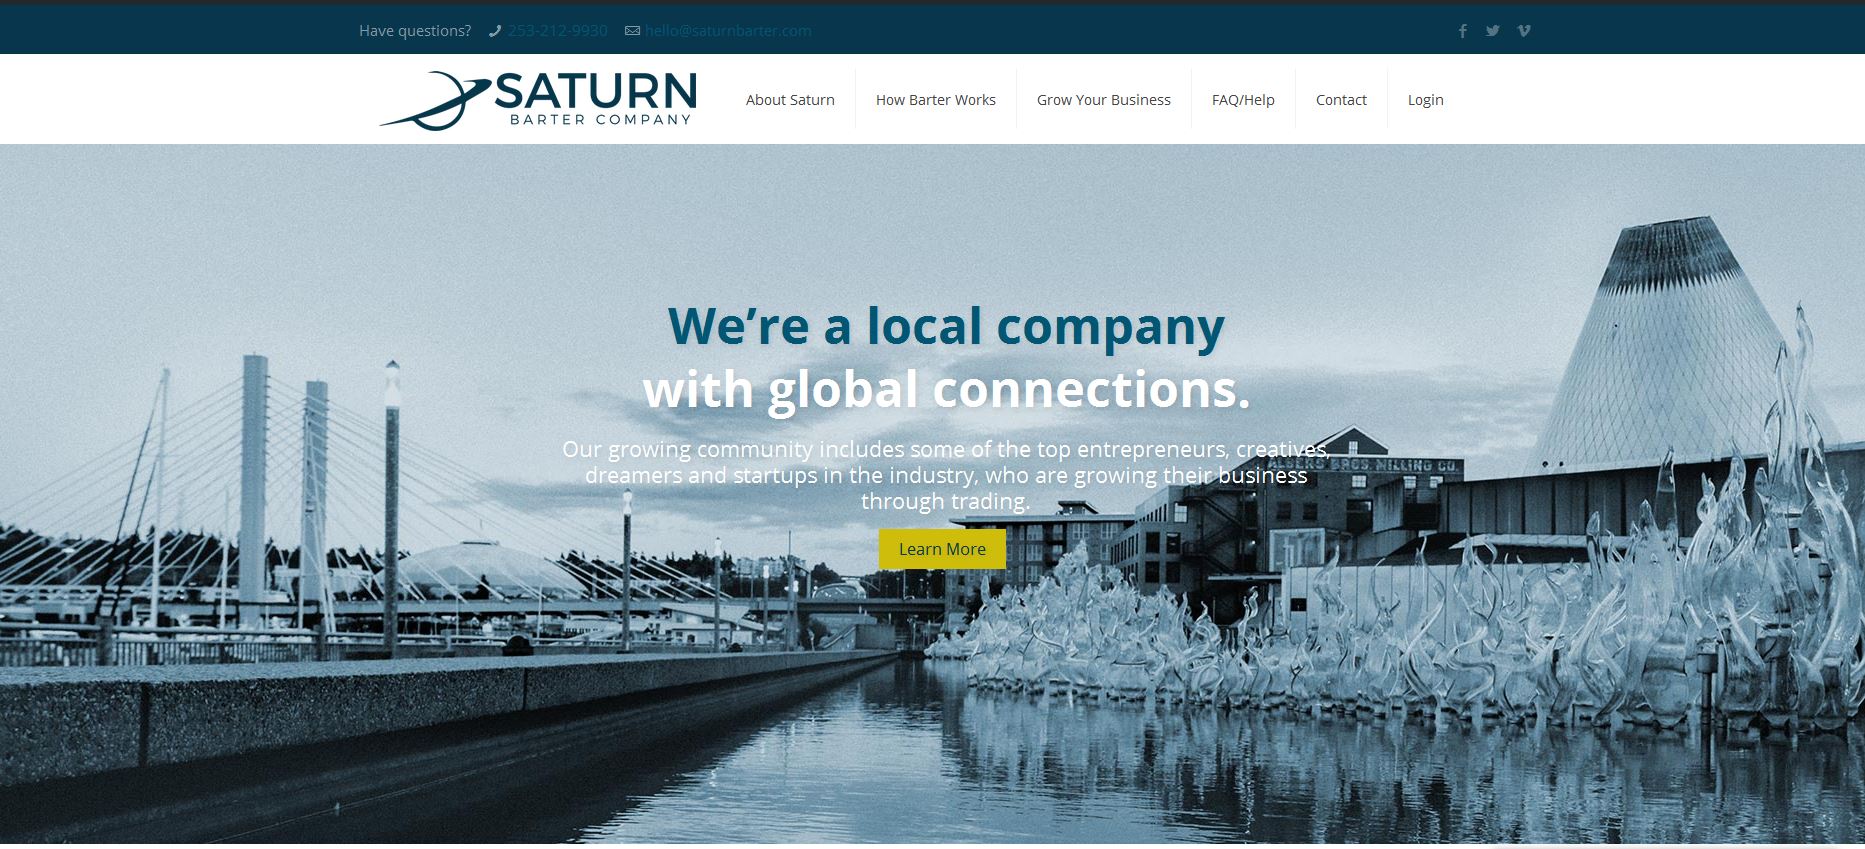 trouble logging in - Saturn Barter Company 